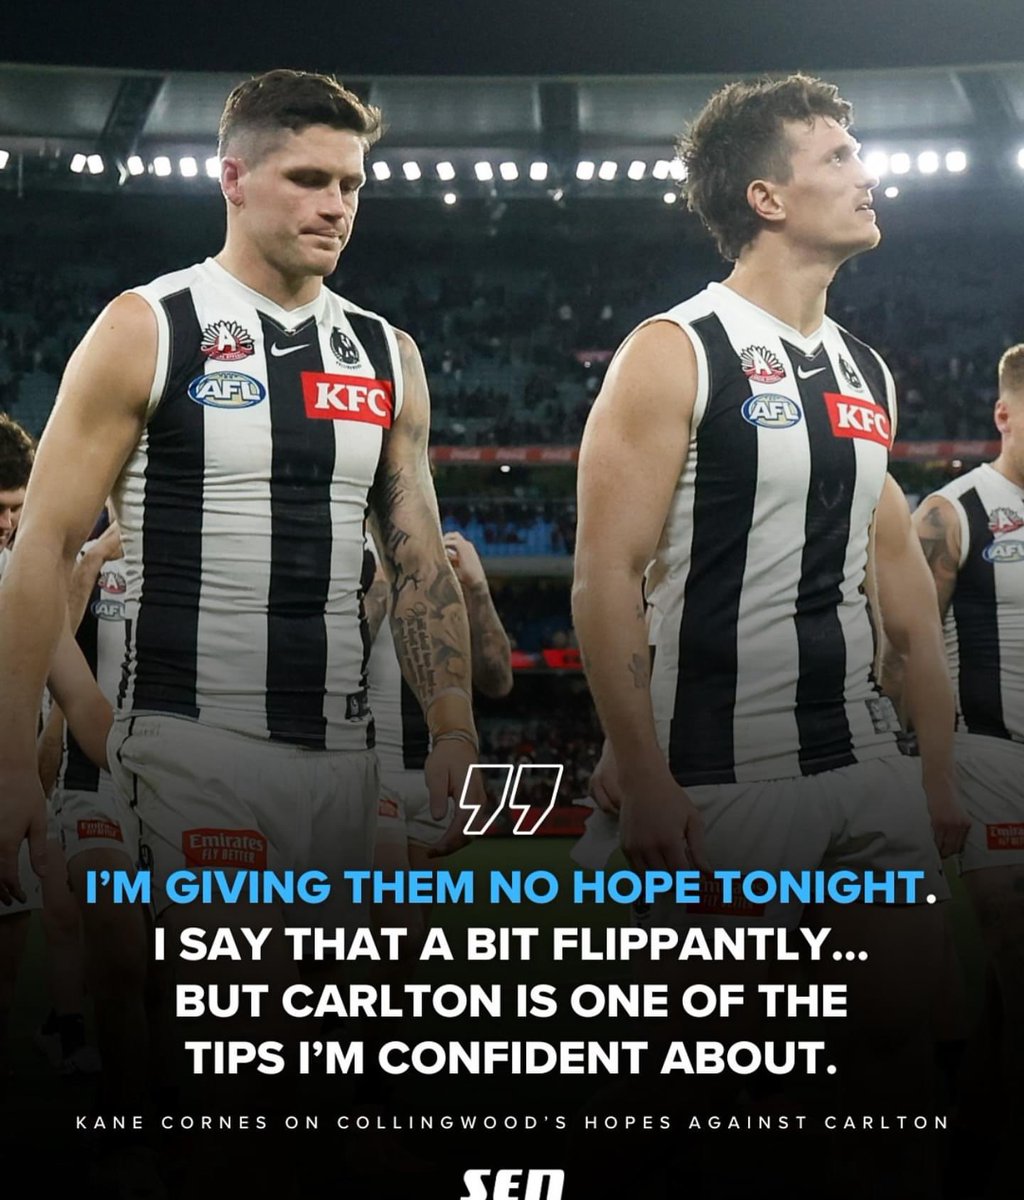 Well that ended well! #GoPies